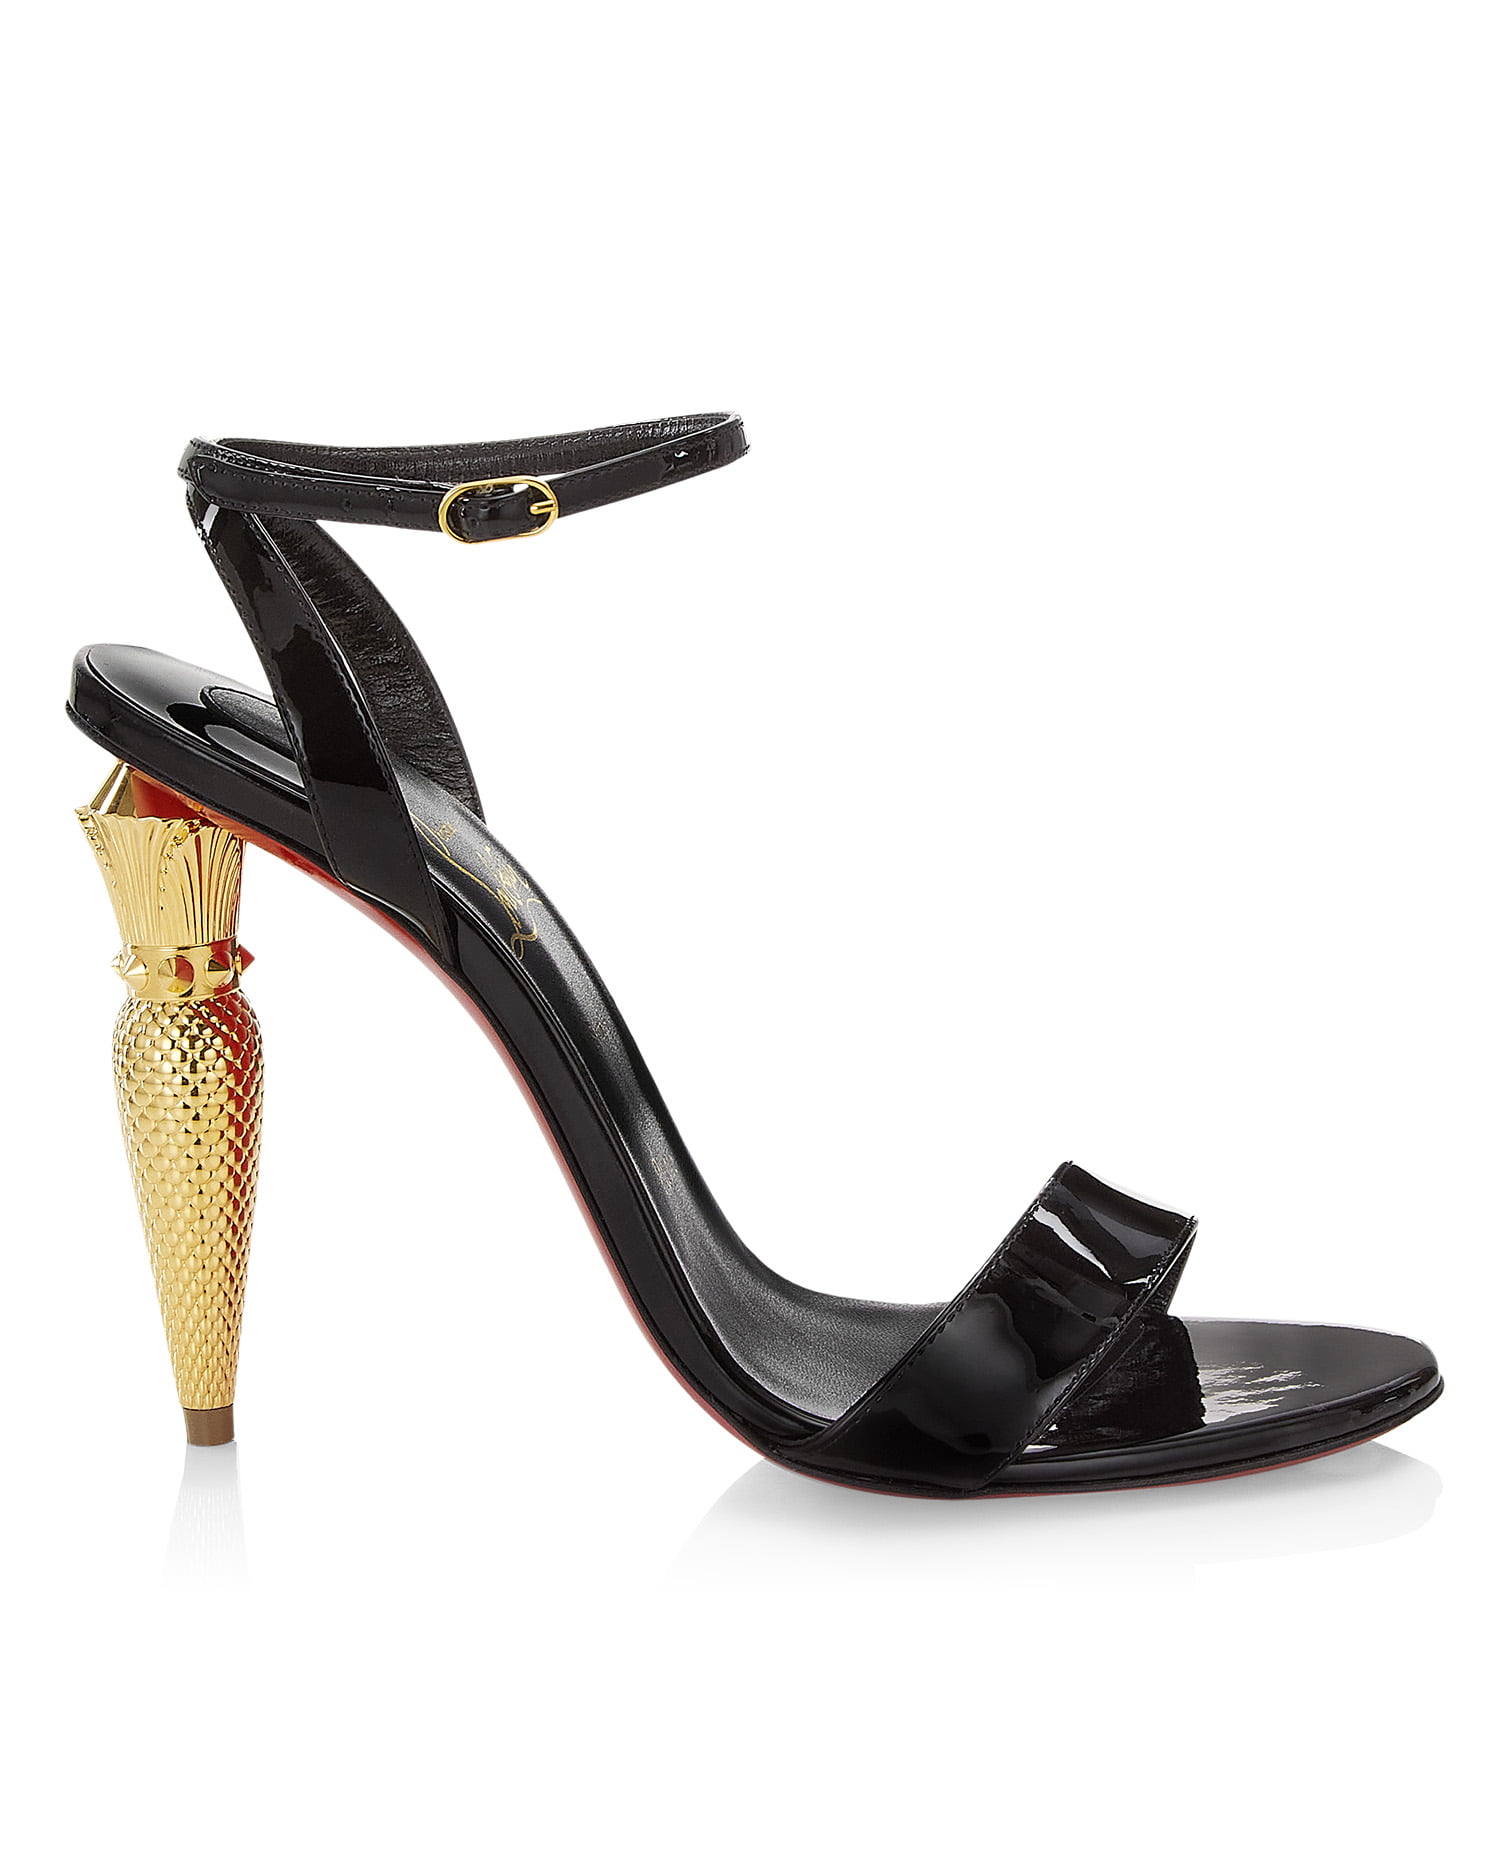 Christian Louboutin Lipqueen Patent Leather Ankle-Strap Sandals